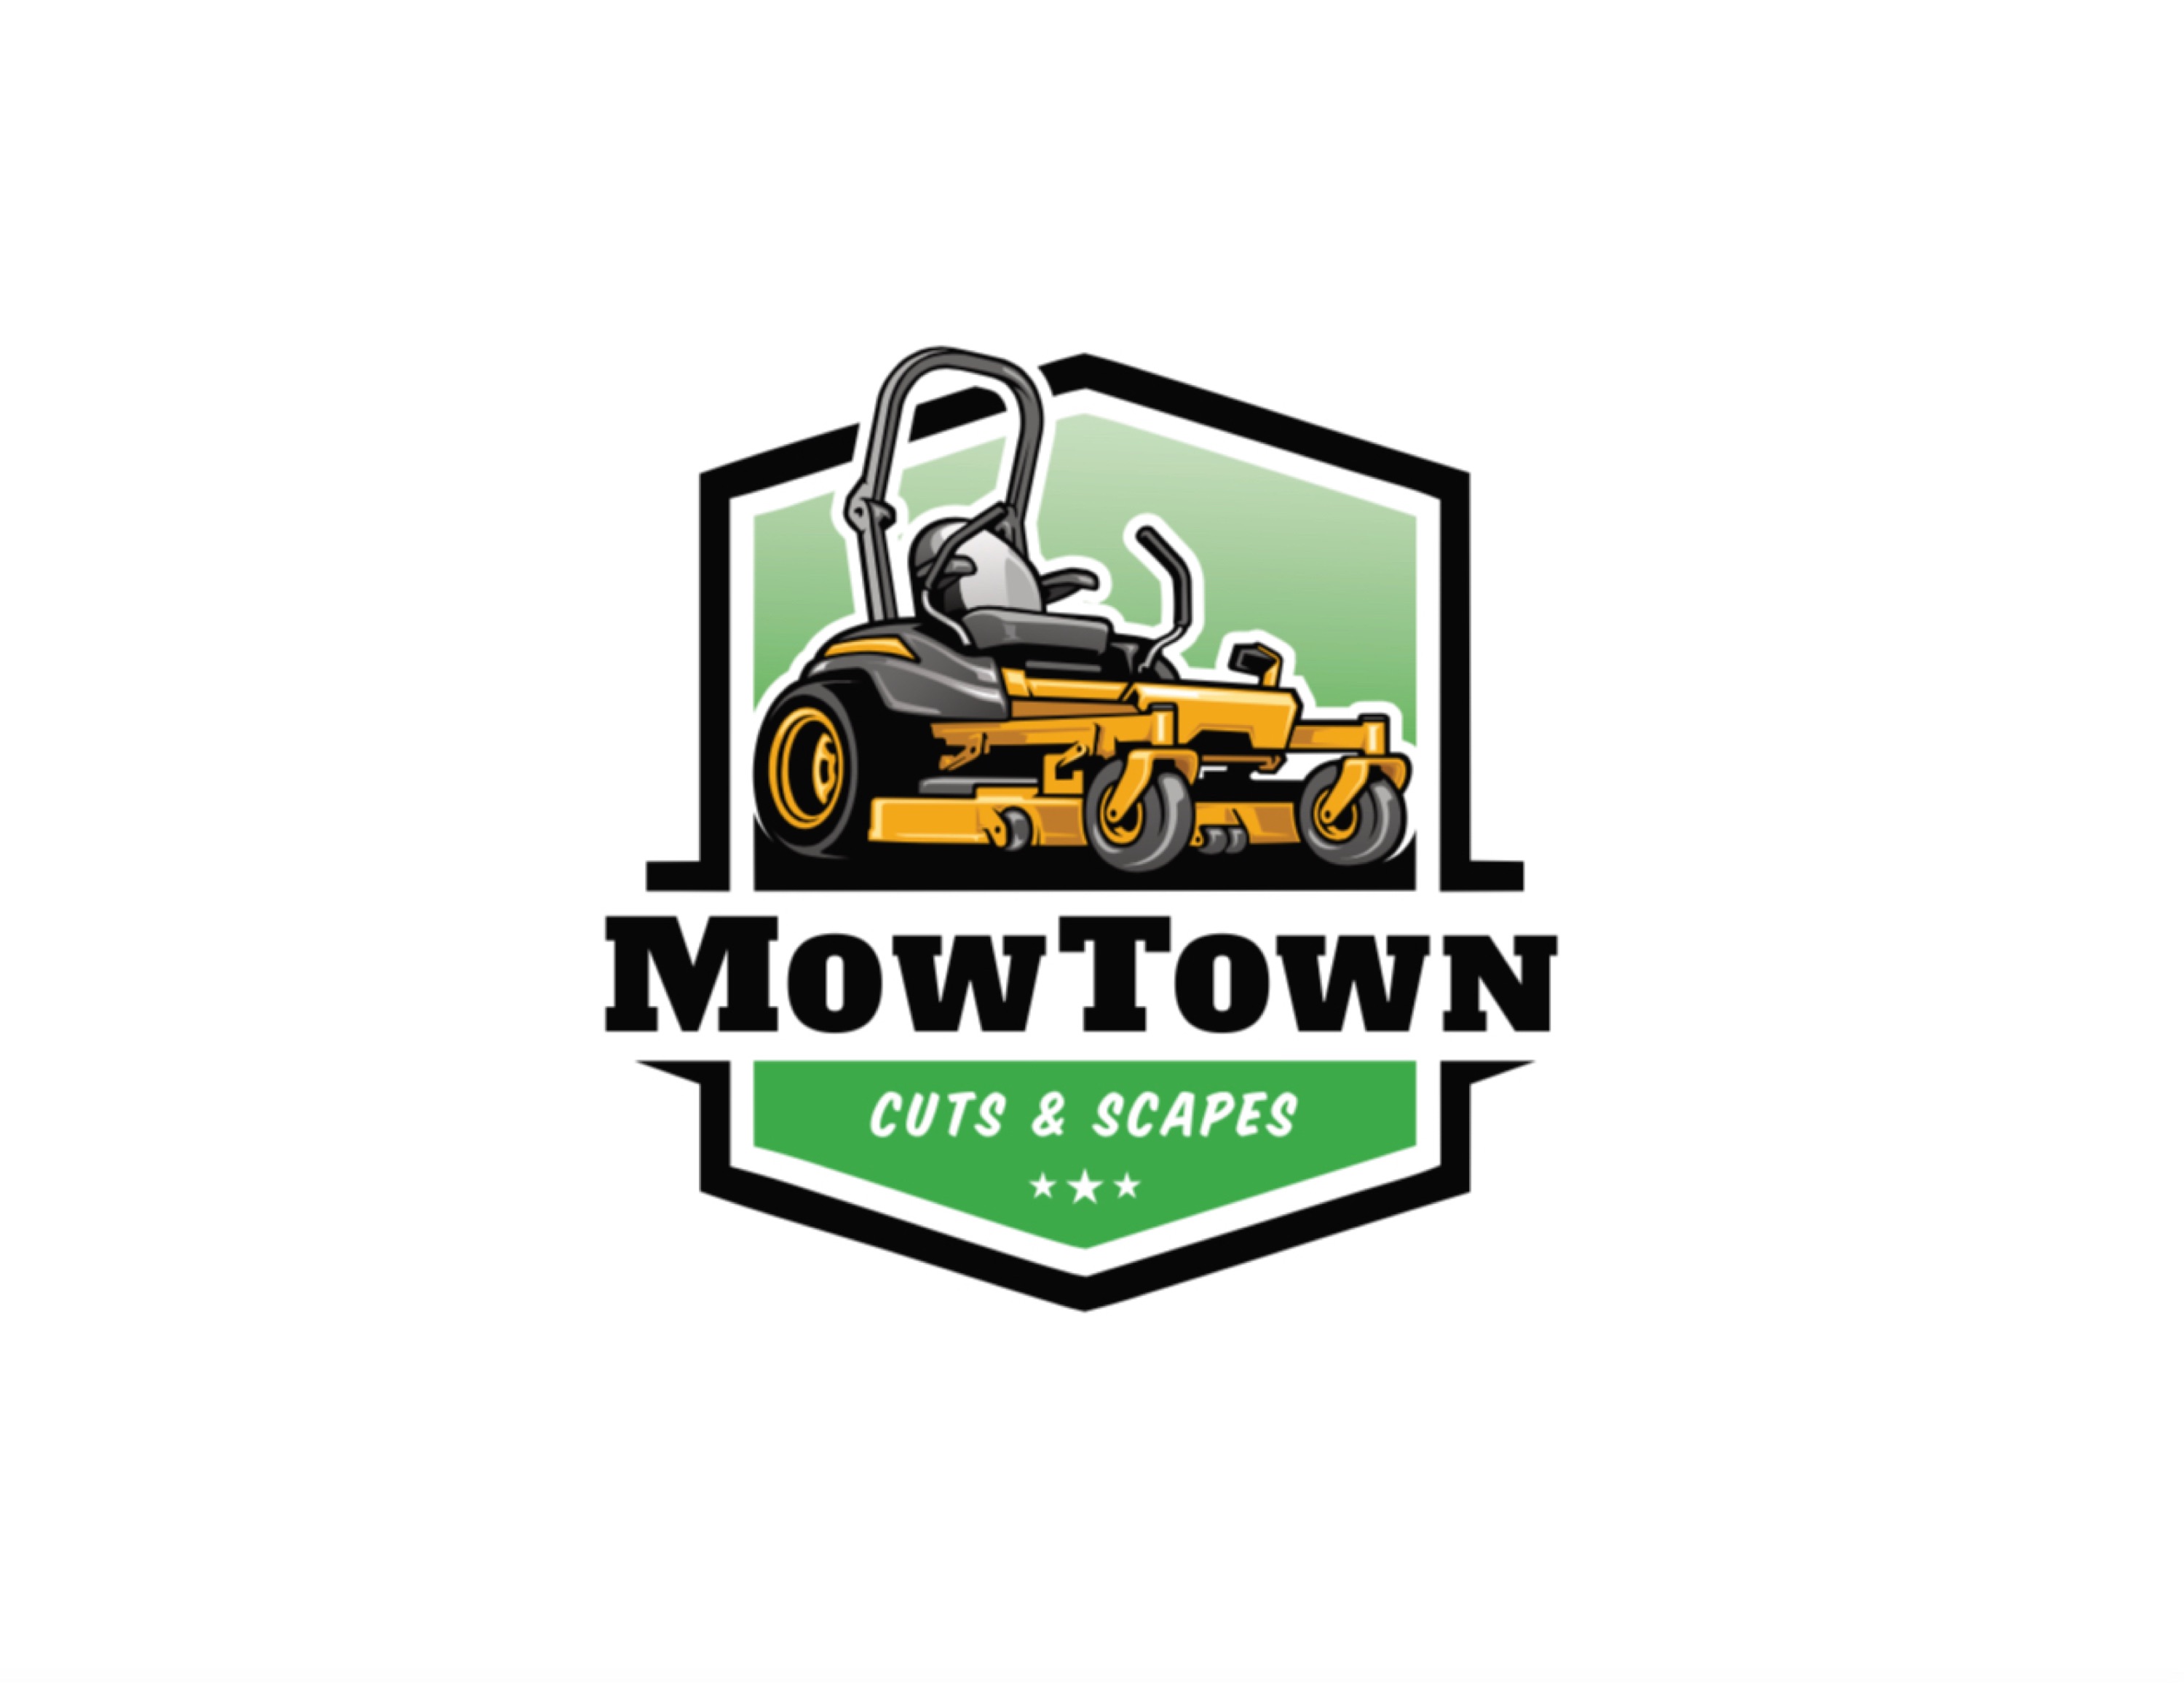 MowTown Cuts & Scapes Logo